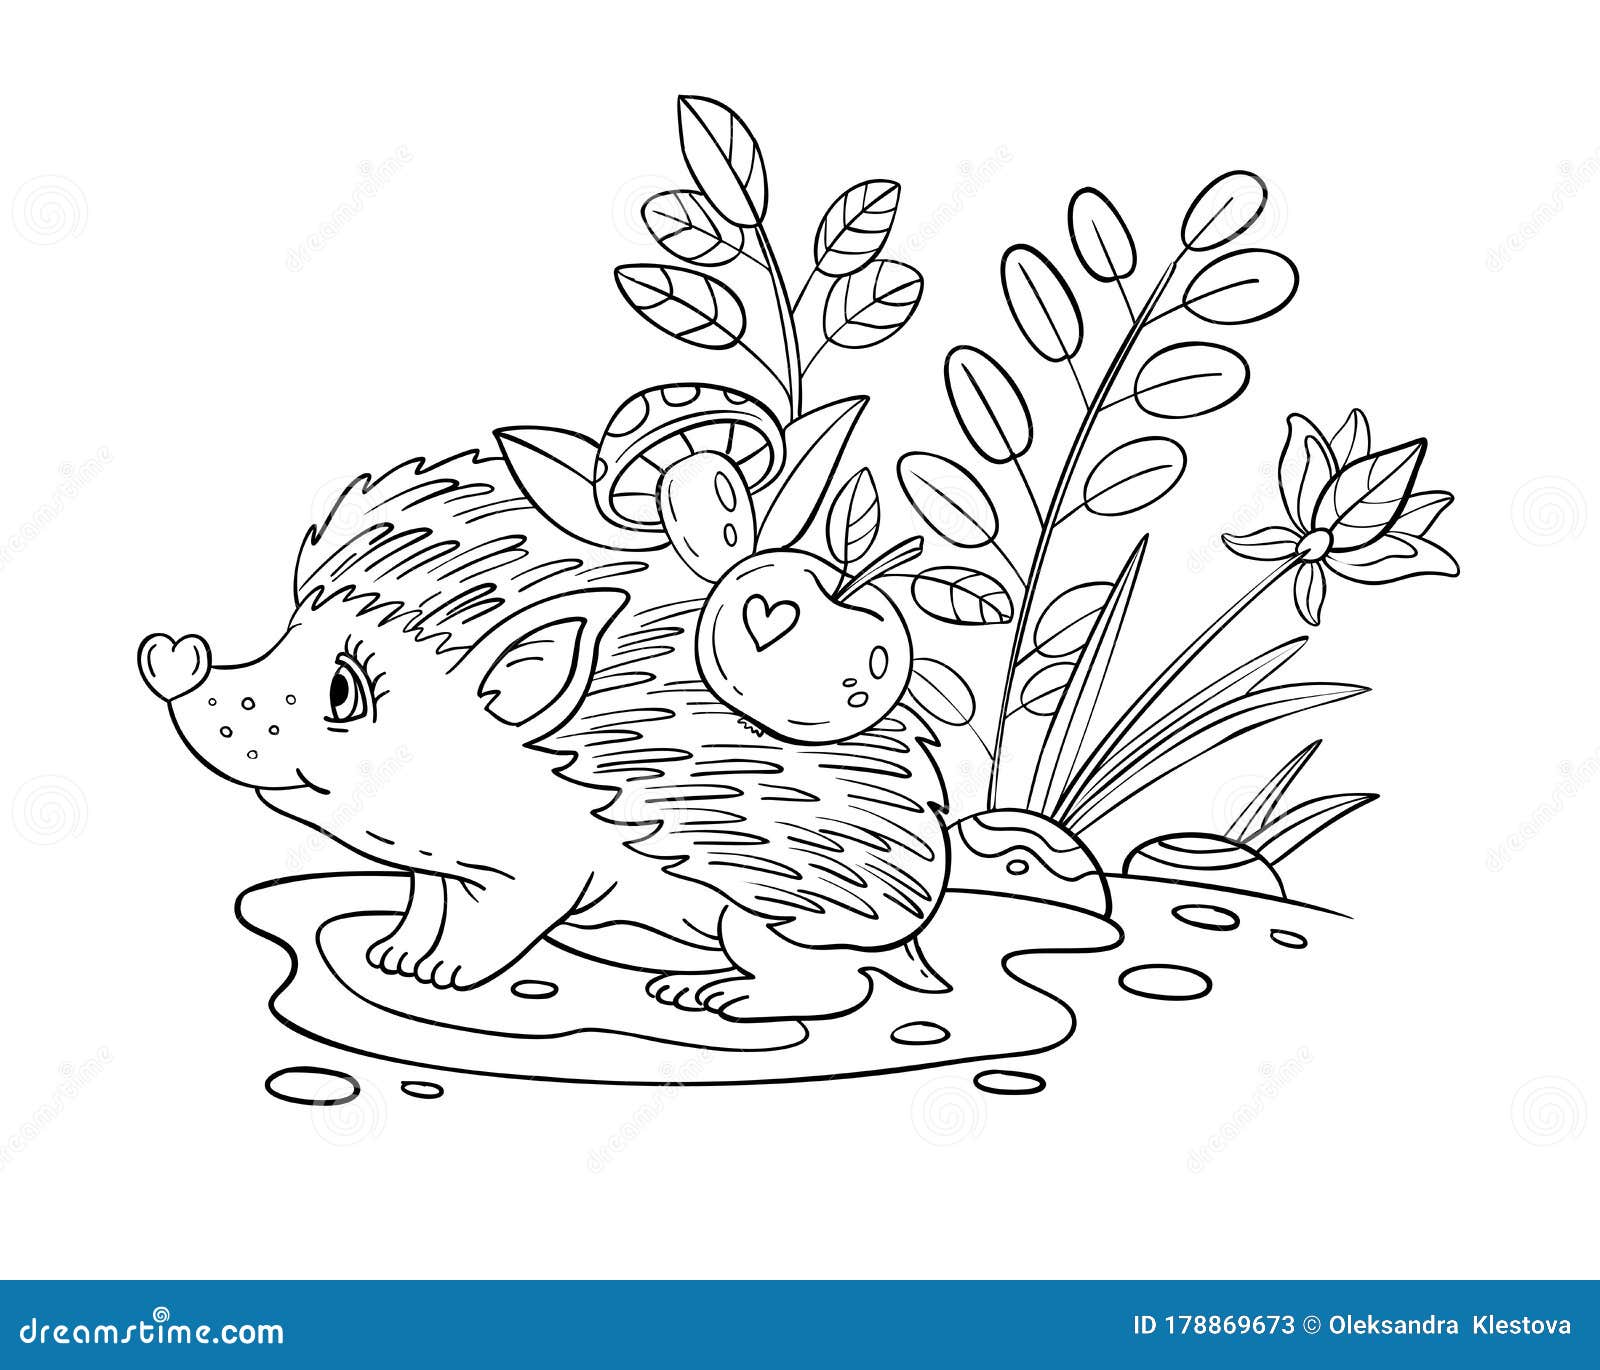 Download Vector Coloring Page With Baby Hedgehog Plants Apples Mushrooms Leaves Stock Vector Illustration Of Wild Baby 178869673